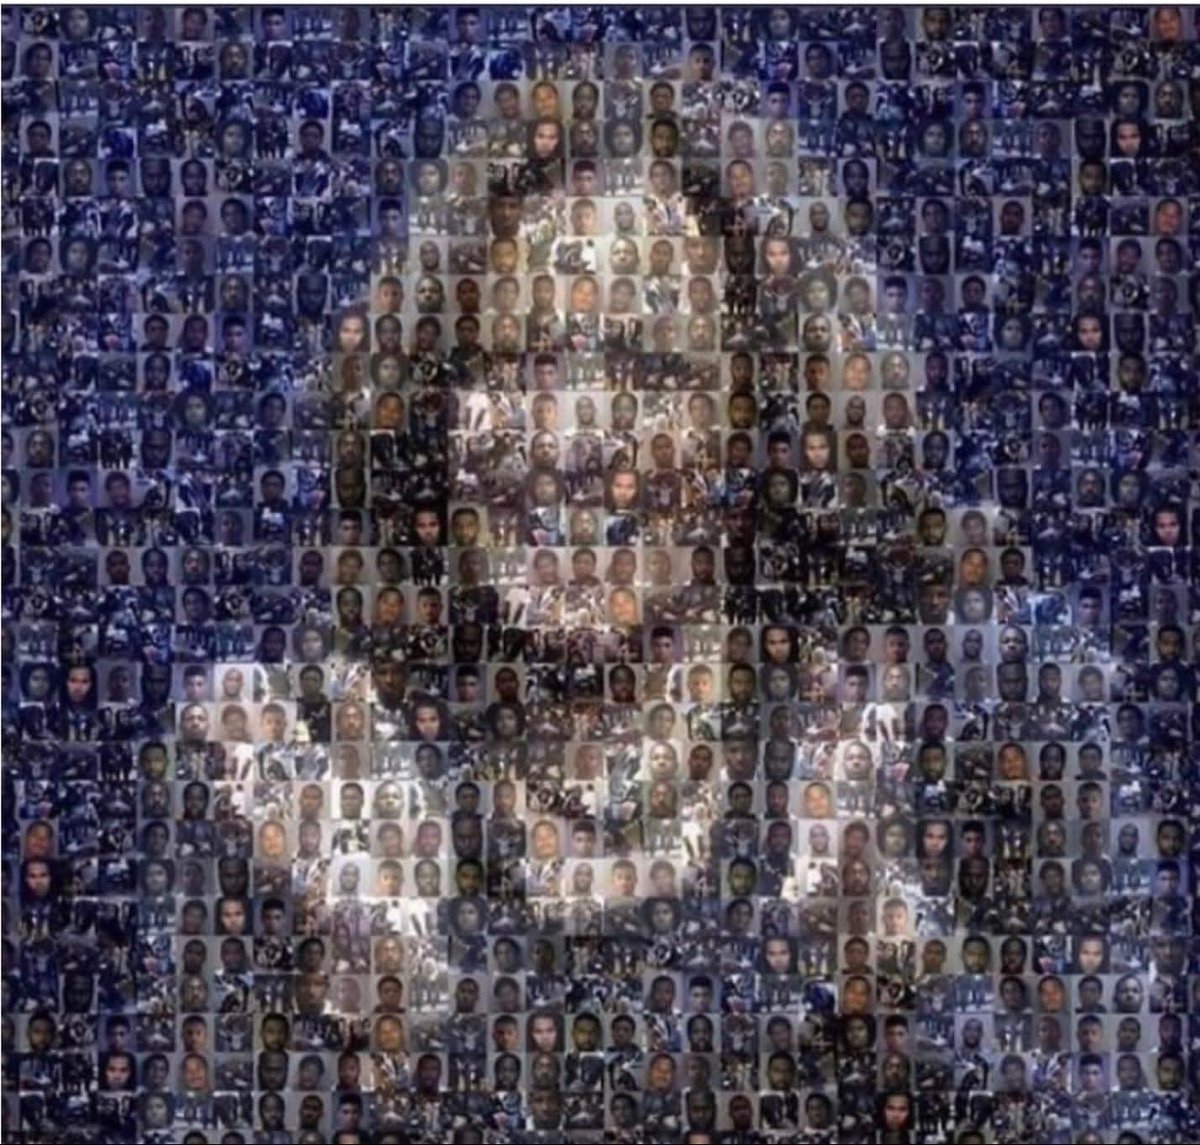 @VP Did you know ⬇️? Mosaic of Kamala Harris made out of all the Black men she locked up and kept in prison past their release date for cheap prison labor. Kamala oversaw 1,900 convictions for marijuana offenses.